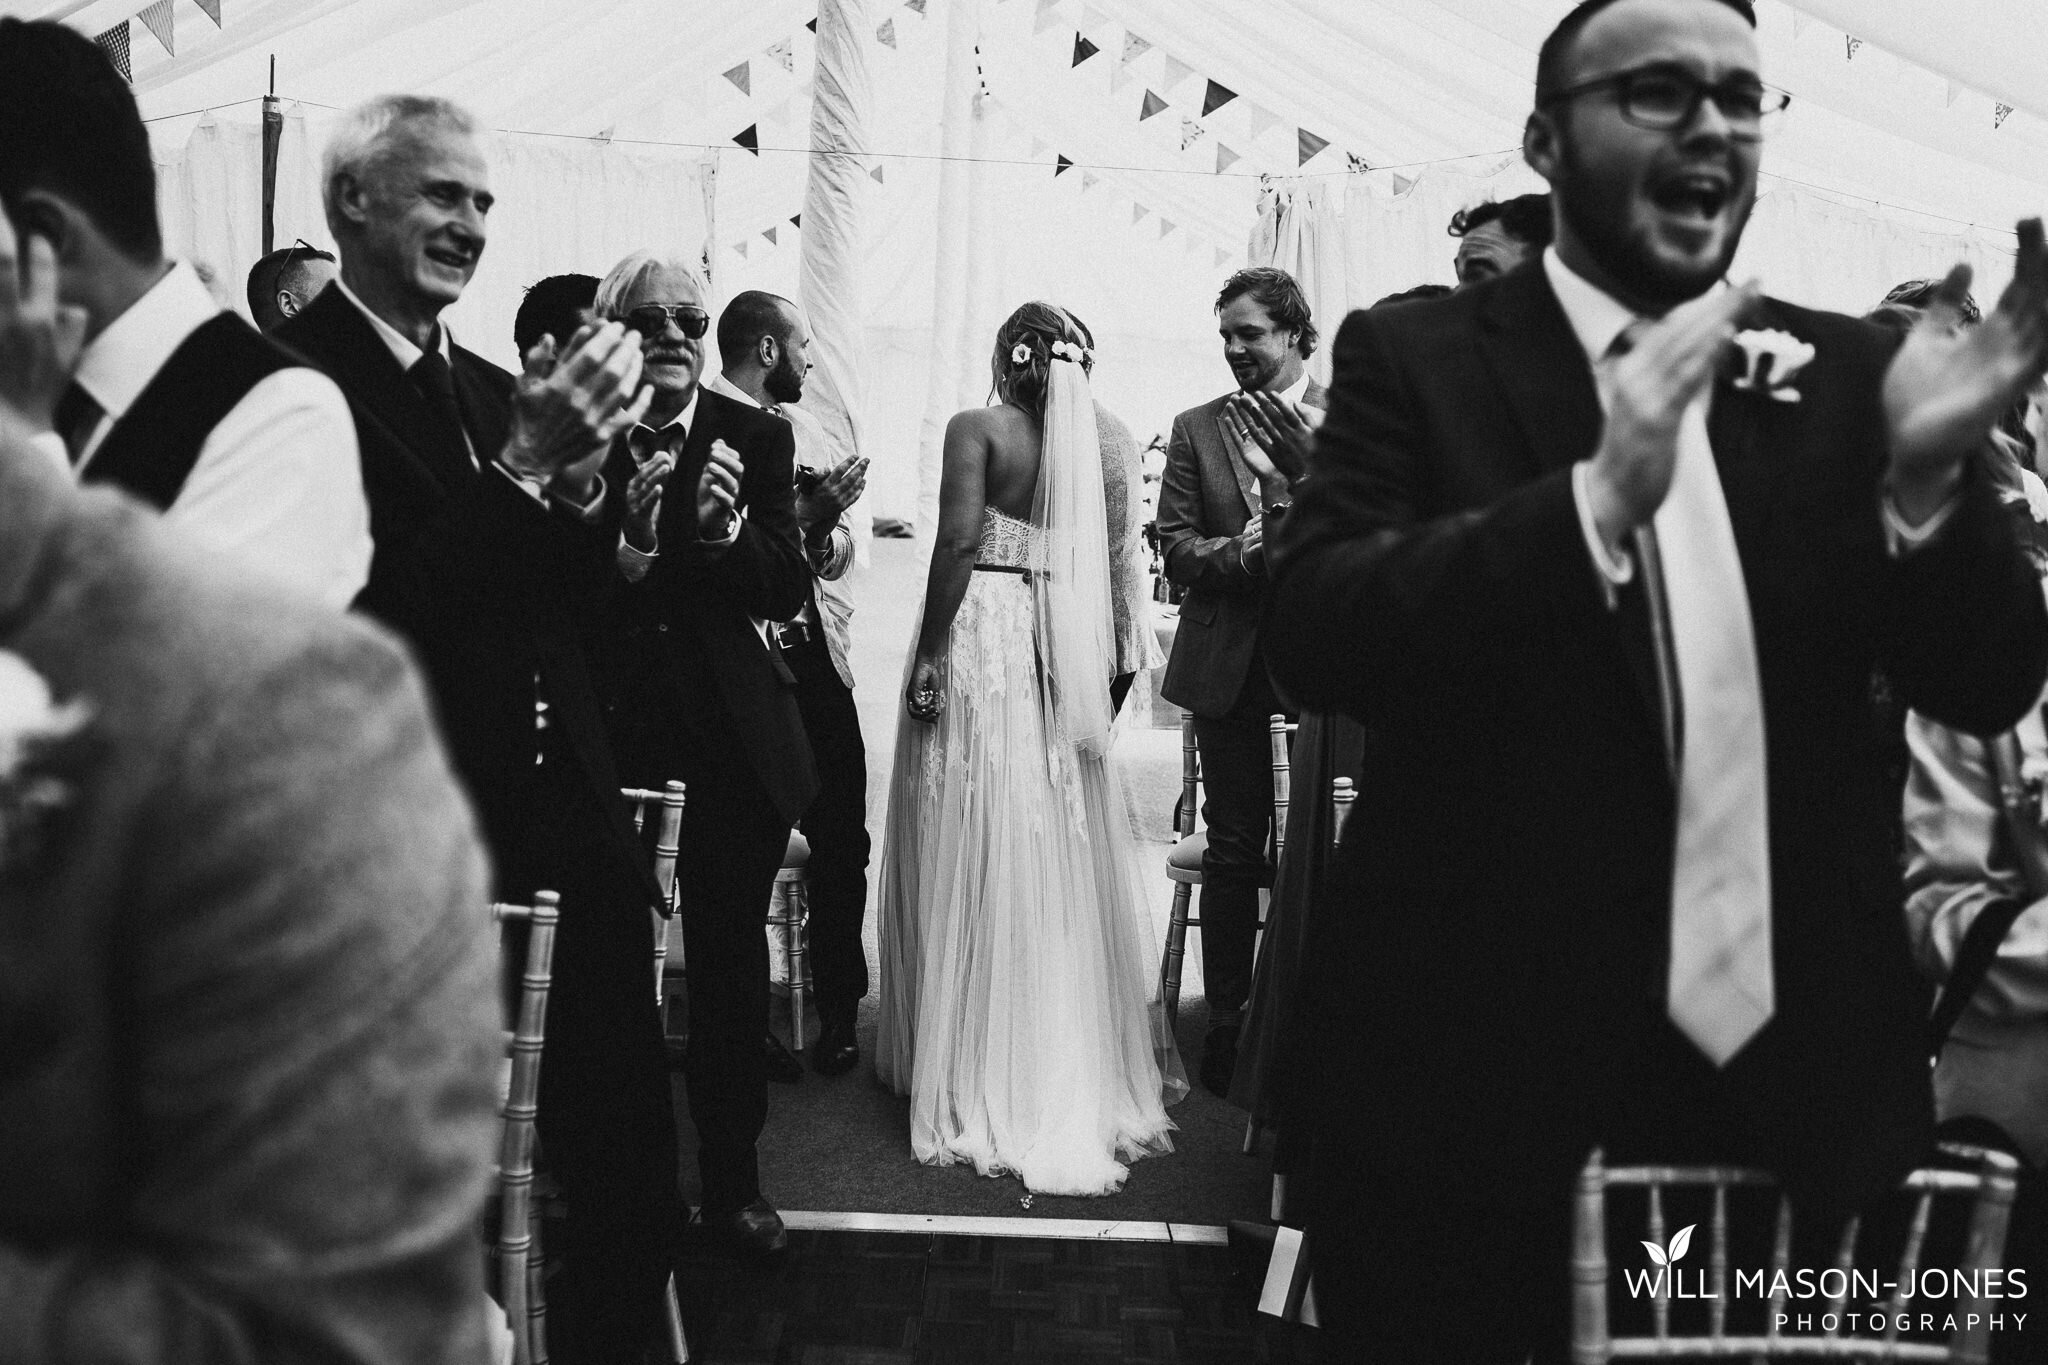  perriswood gower weddings photography colourful documentary 